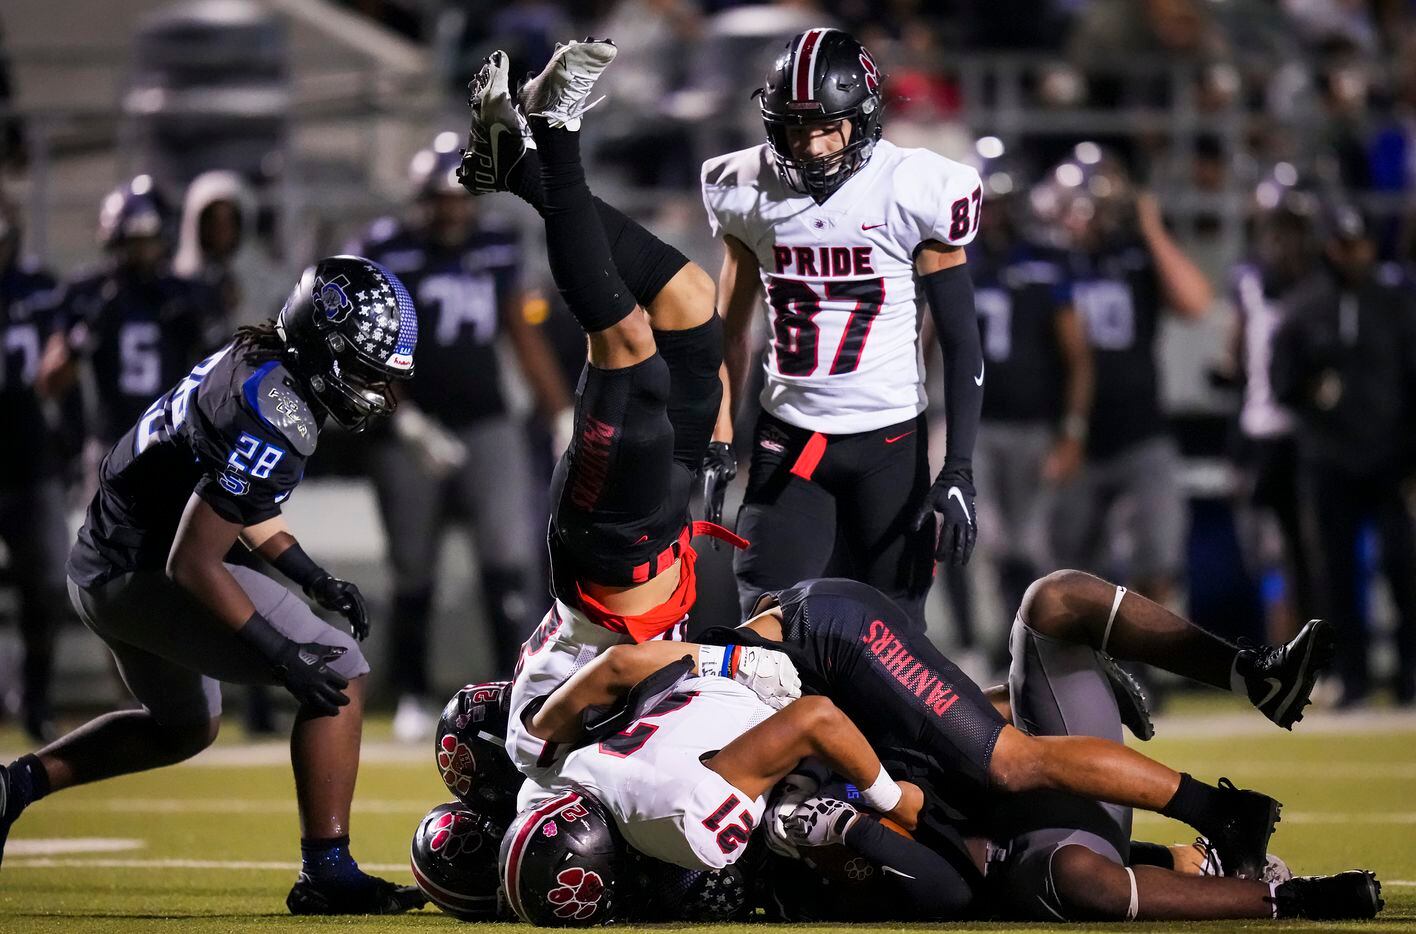 Colleyville Heritage running back Riley Wormley (27) tumbles over the pile as linebacker Soane Tavo (21) brings down Mansfield Summit’s Ahmaad Moses (3) during the first half of the Class 5A Division I Region I final on Friday, Dec. 3, 2021, in North Richland Hills, Texas. (Smiley N. Pool/The Dallas Morning News)